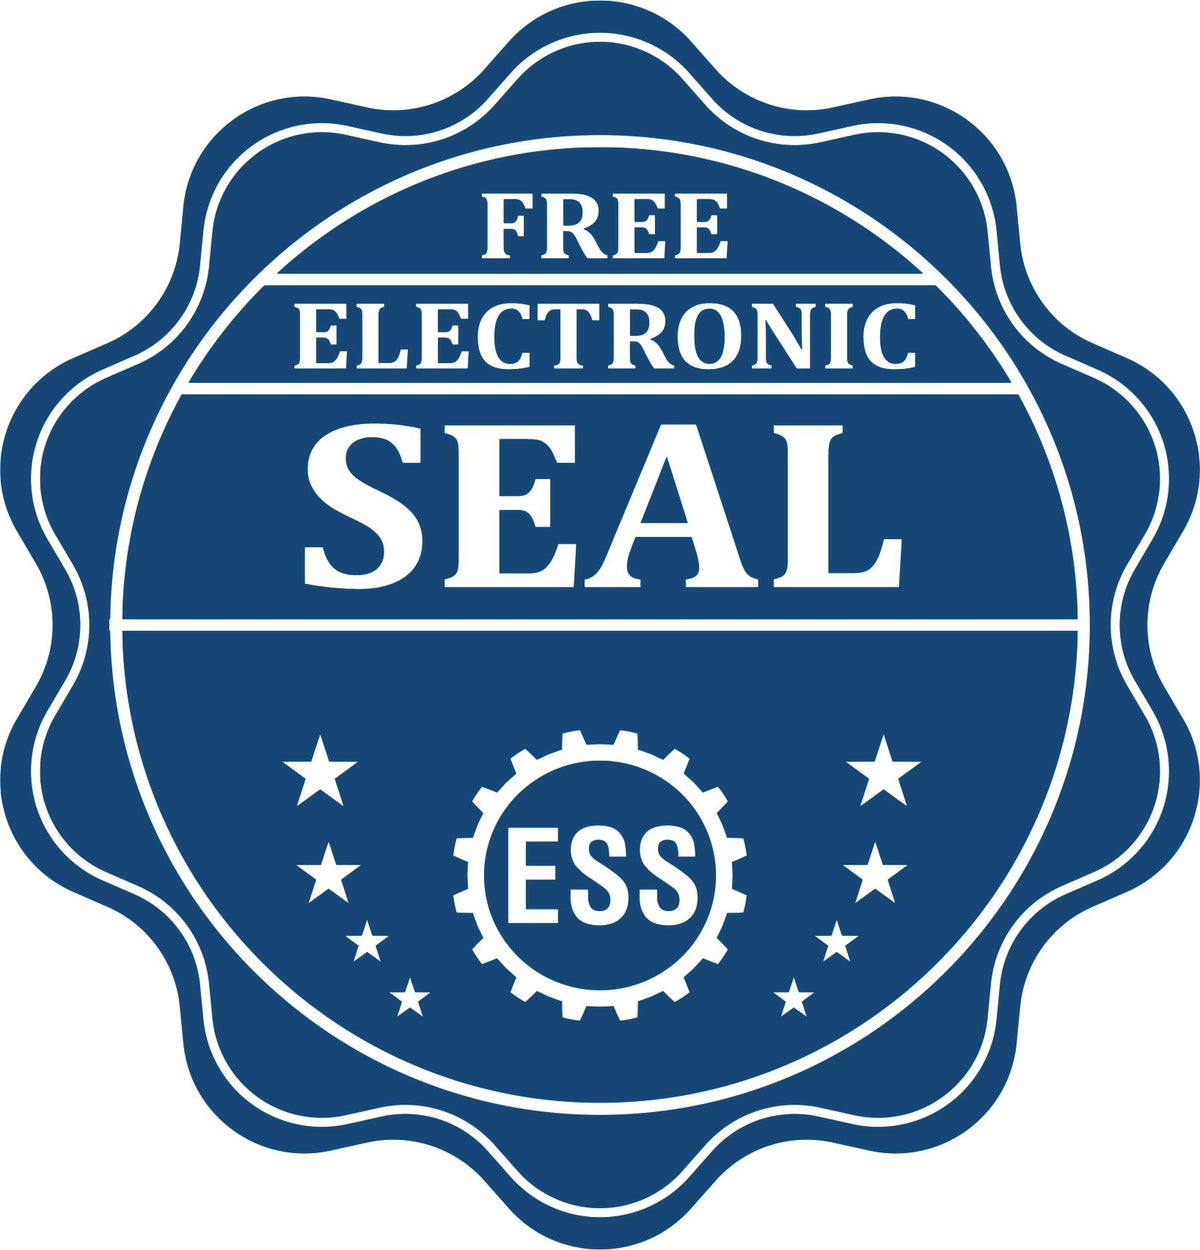 A badge showing a free electronic seal for the Hybrid Tennessee Architect Seal with stars and the ESS gear on the emblem.